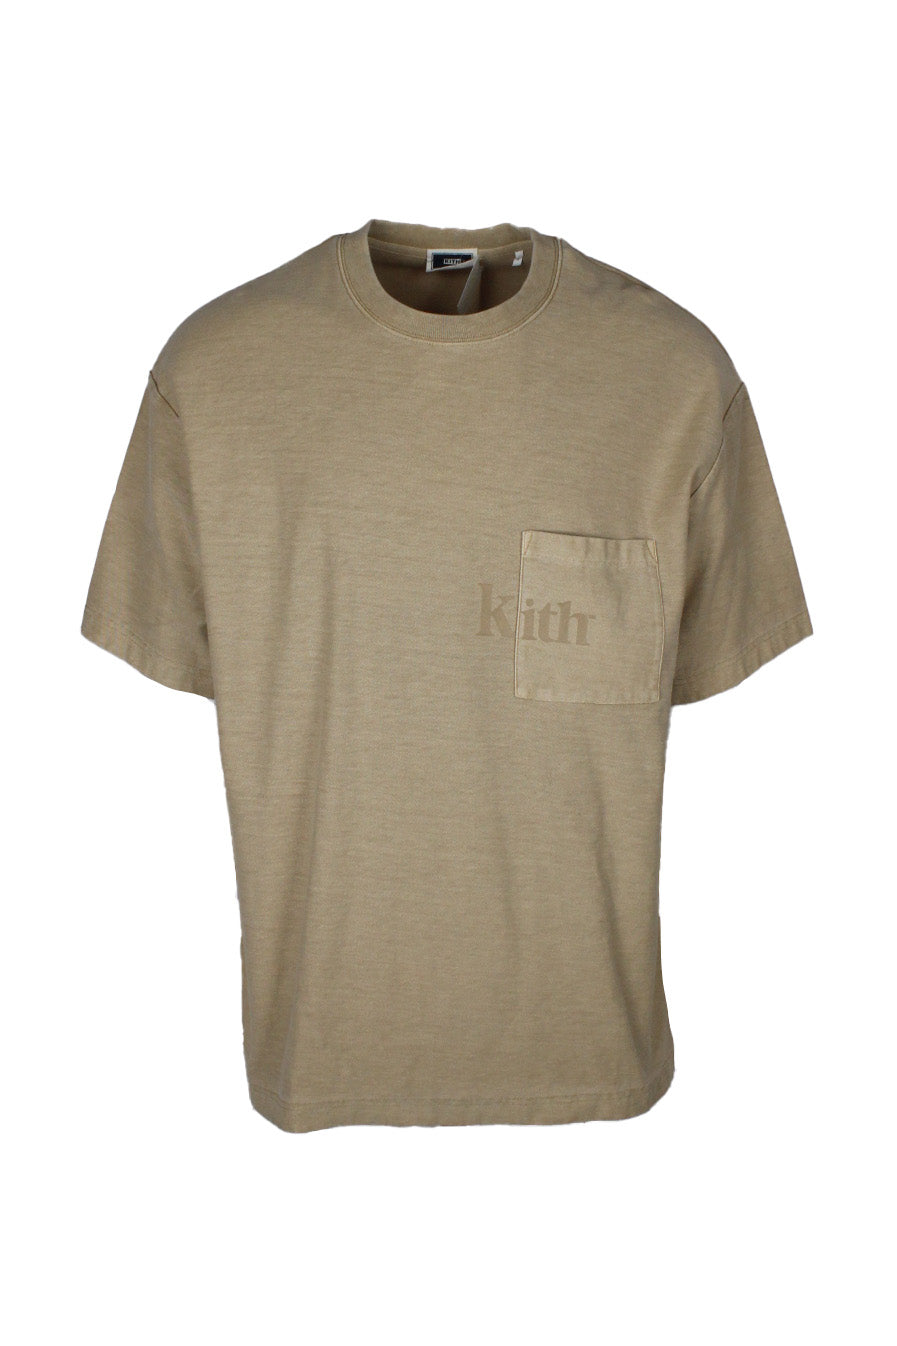 front view of kith beige cotton t-shirt. features tonal ‘kith’ logo in felt letters near/on left breast pocket with ribbed collar. 